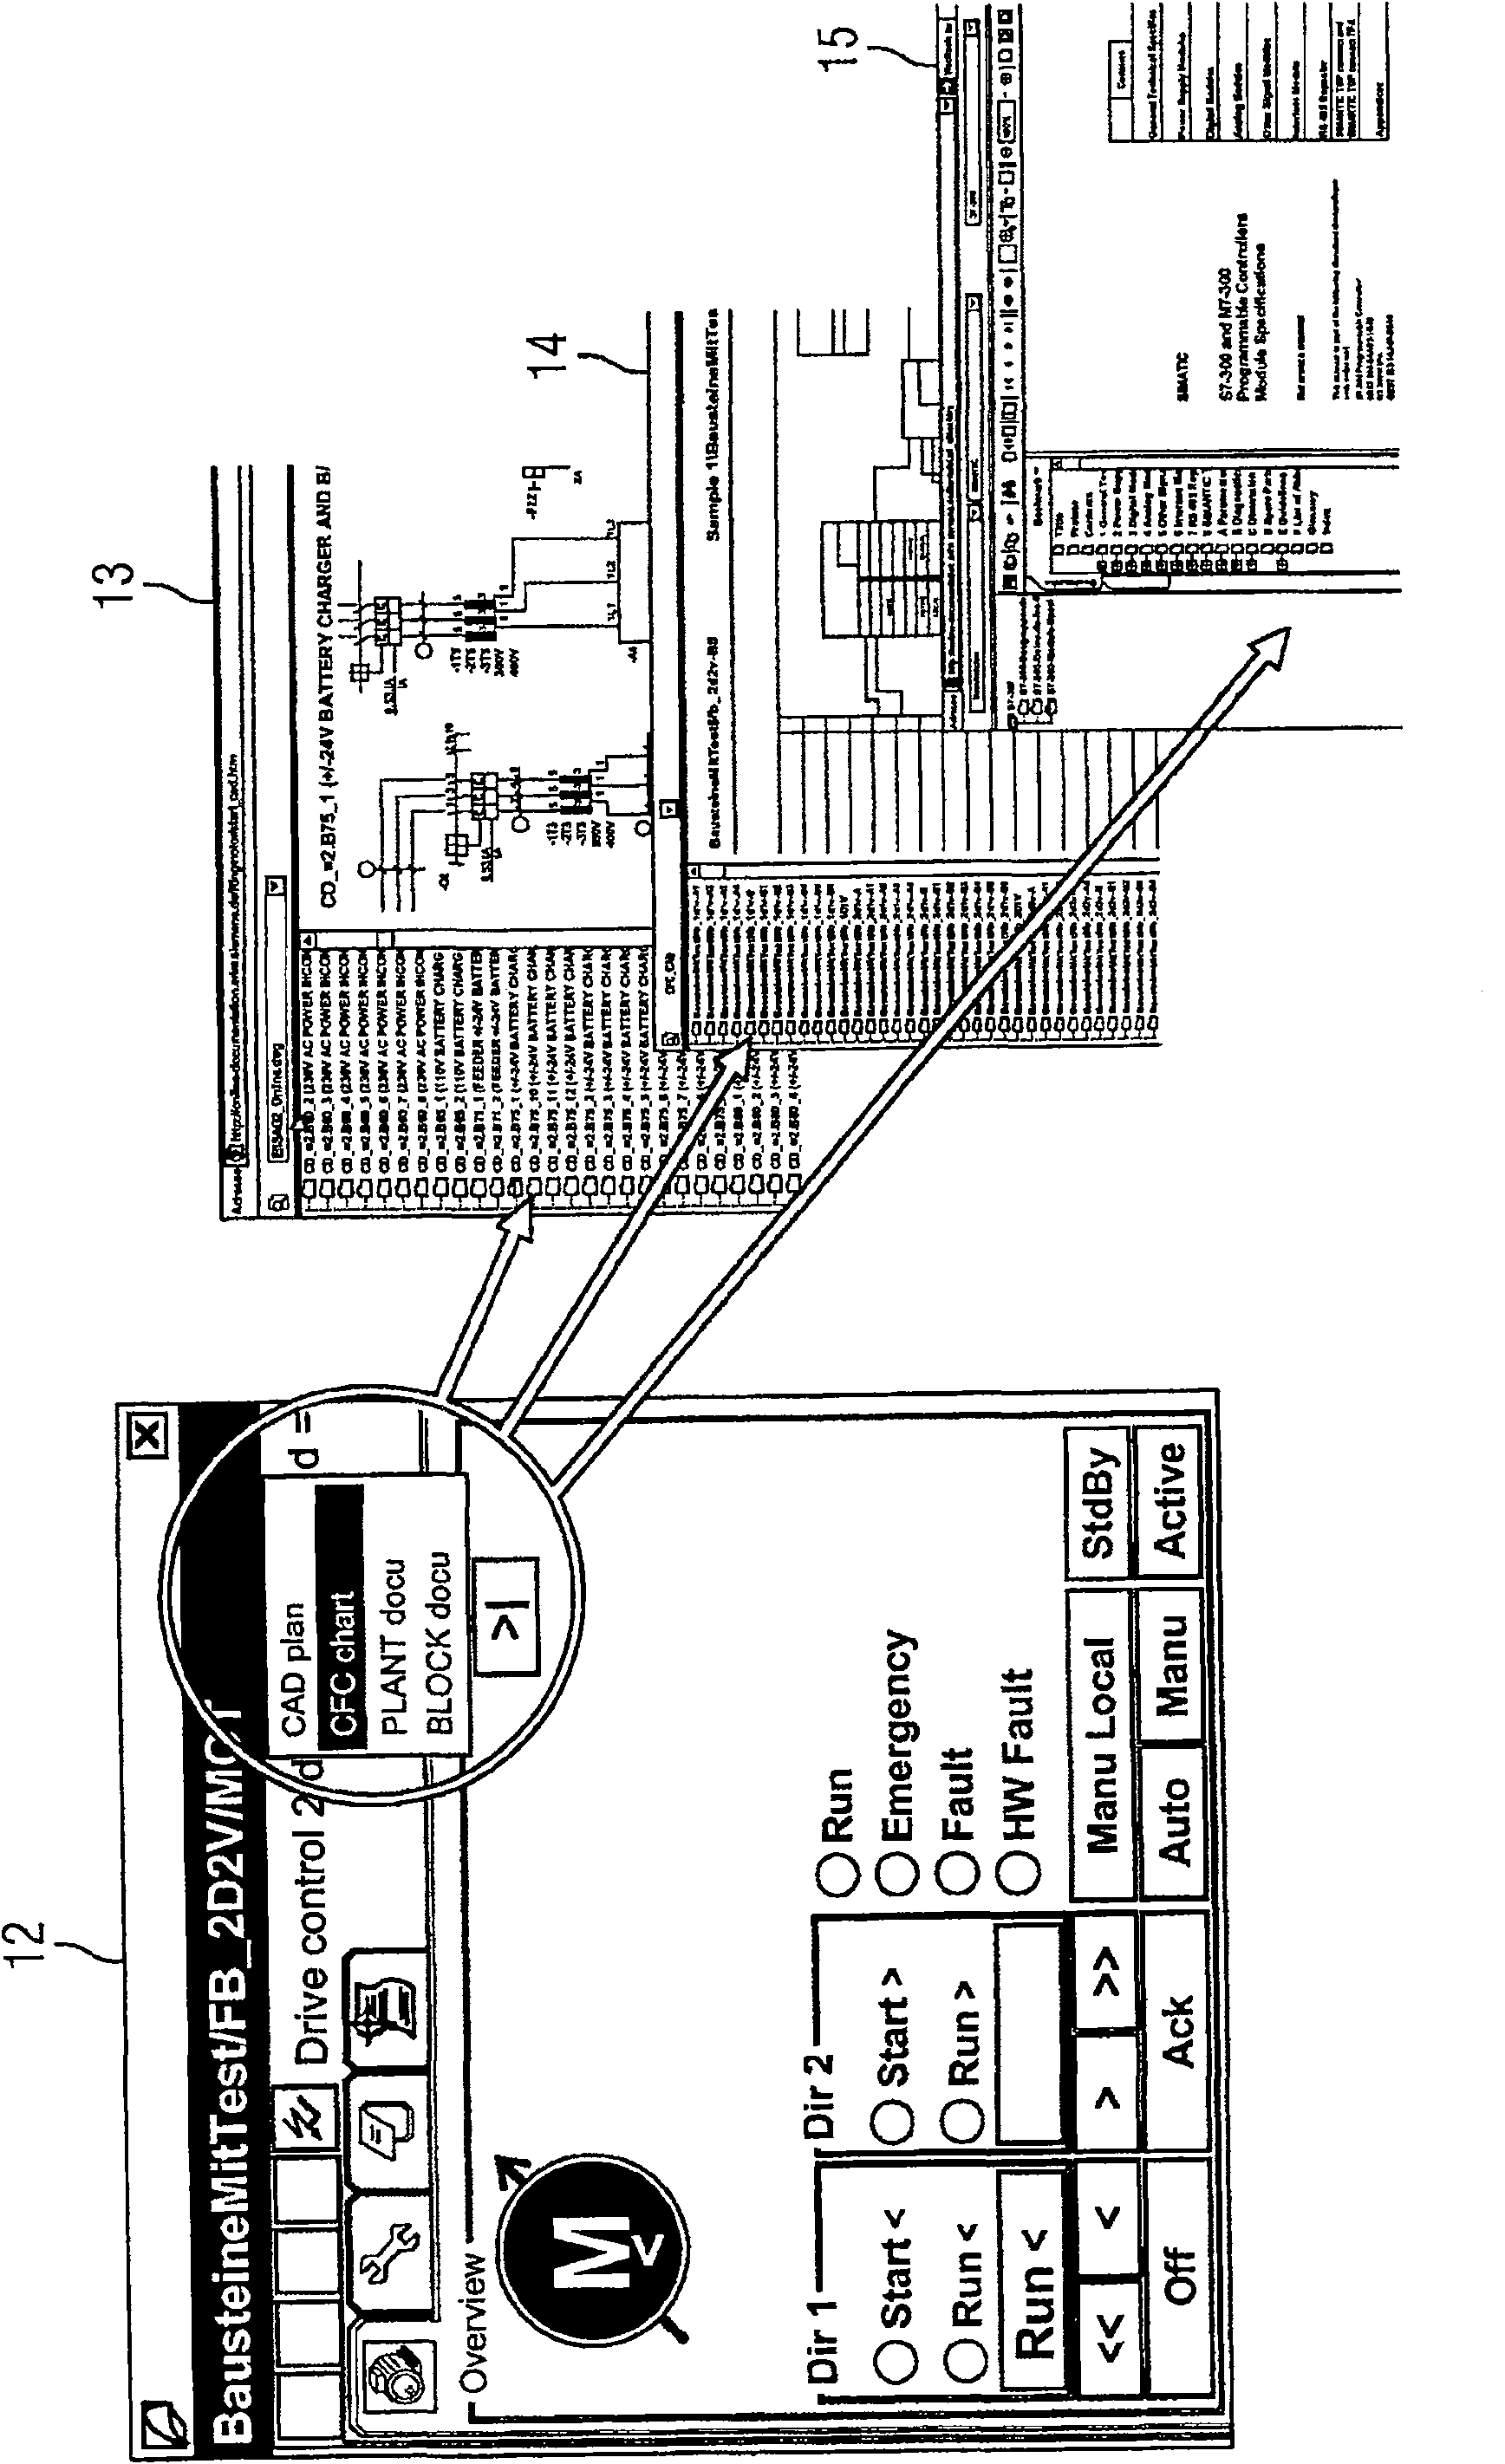 Method for interlinking technical data and system for operating and observing an industrial plant